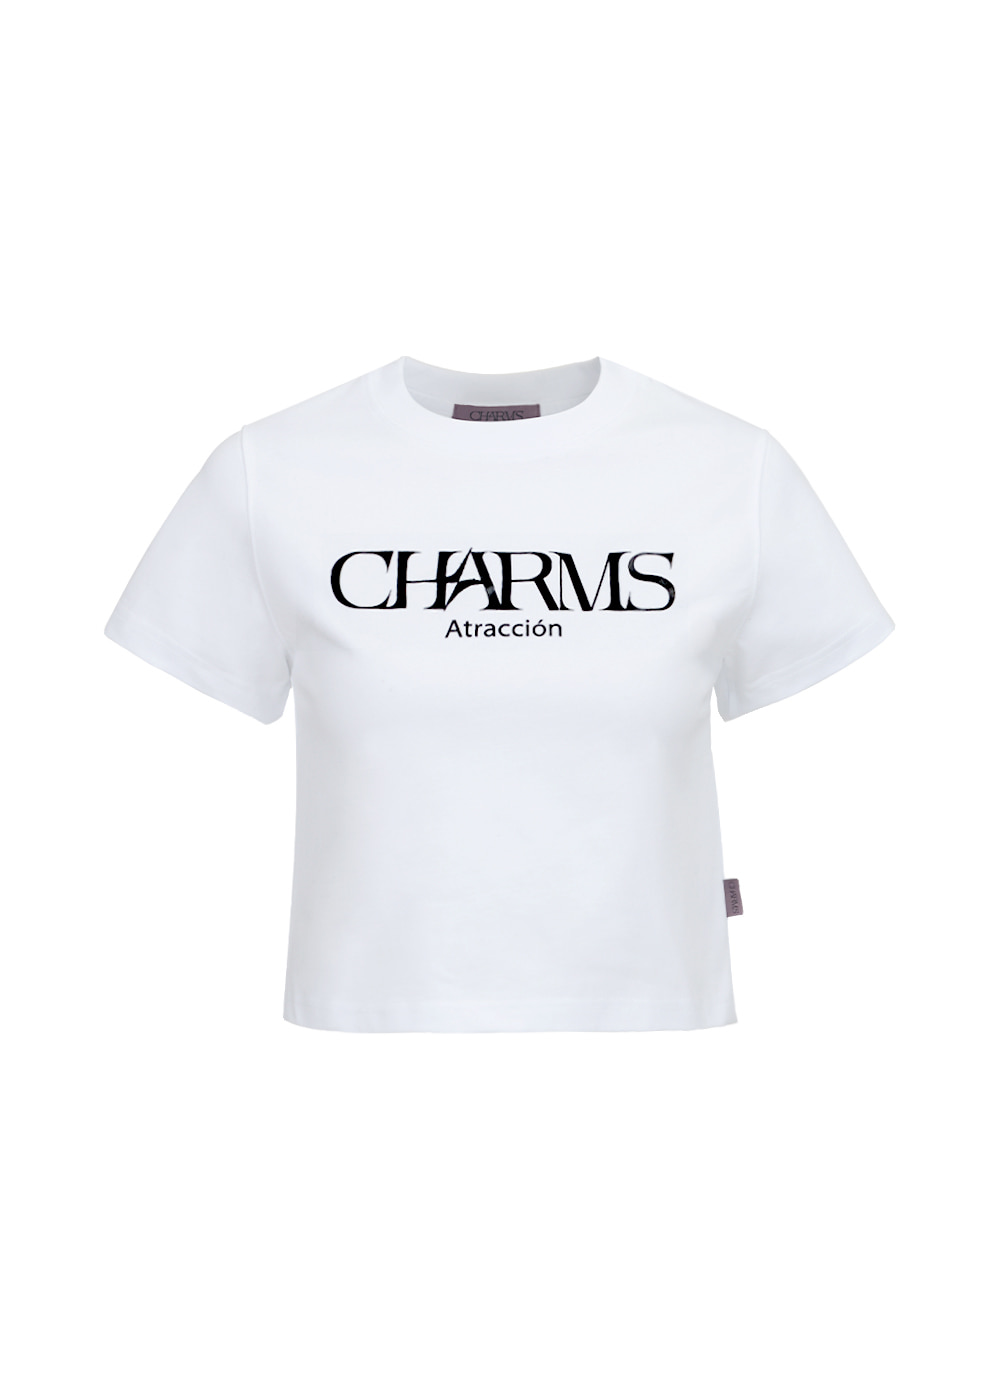 CHARMS Signature Crop T-shirt - WHITE